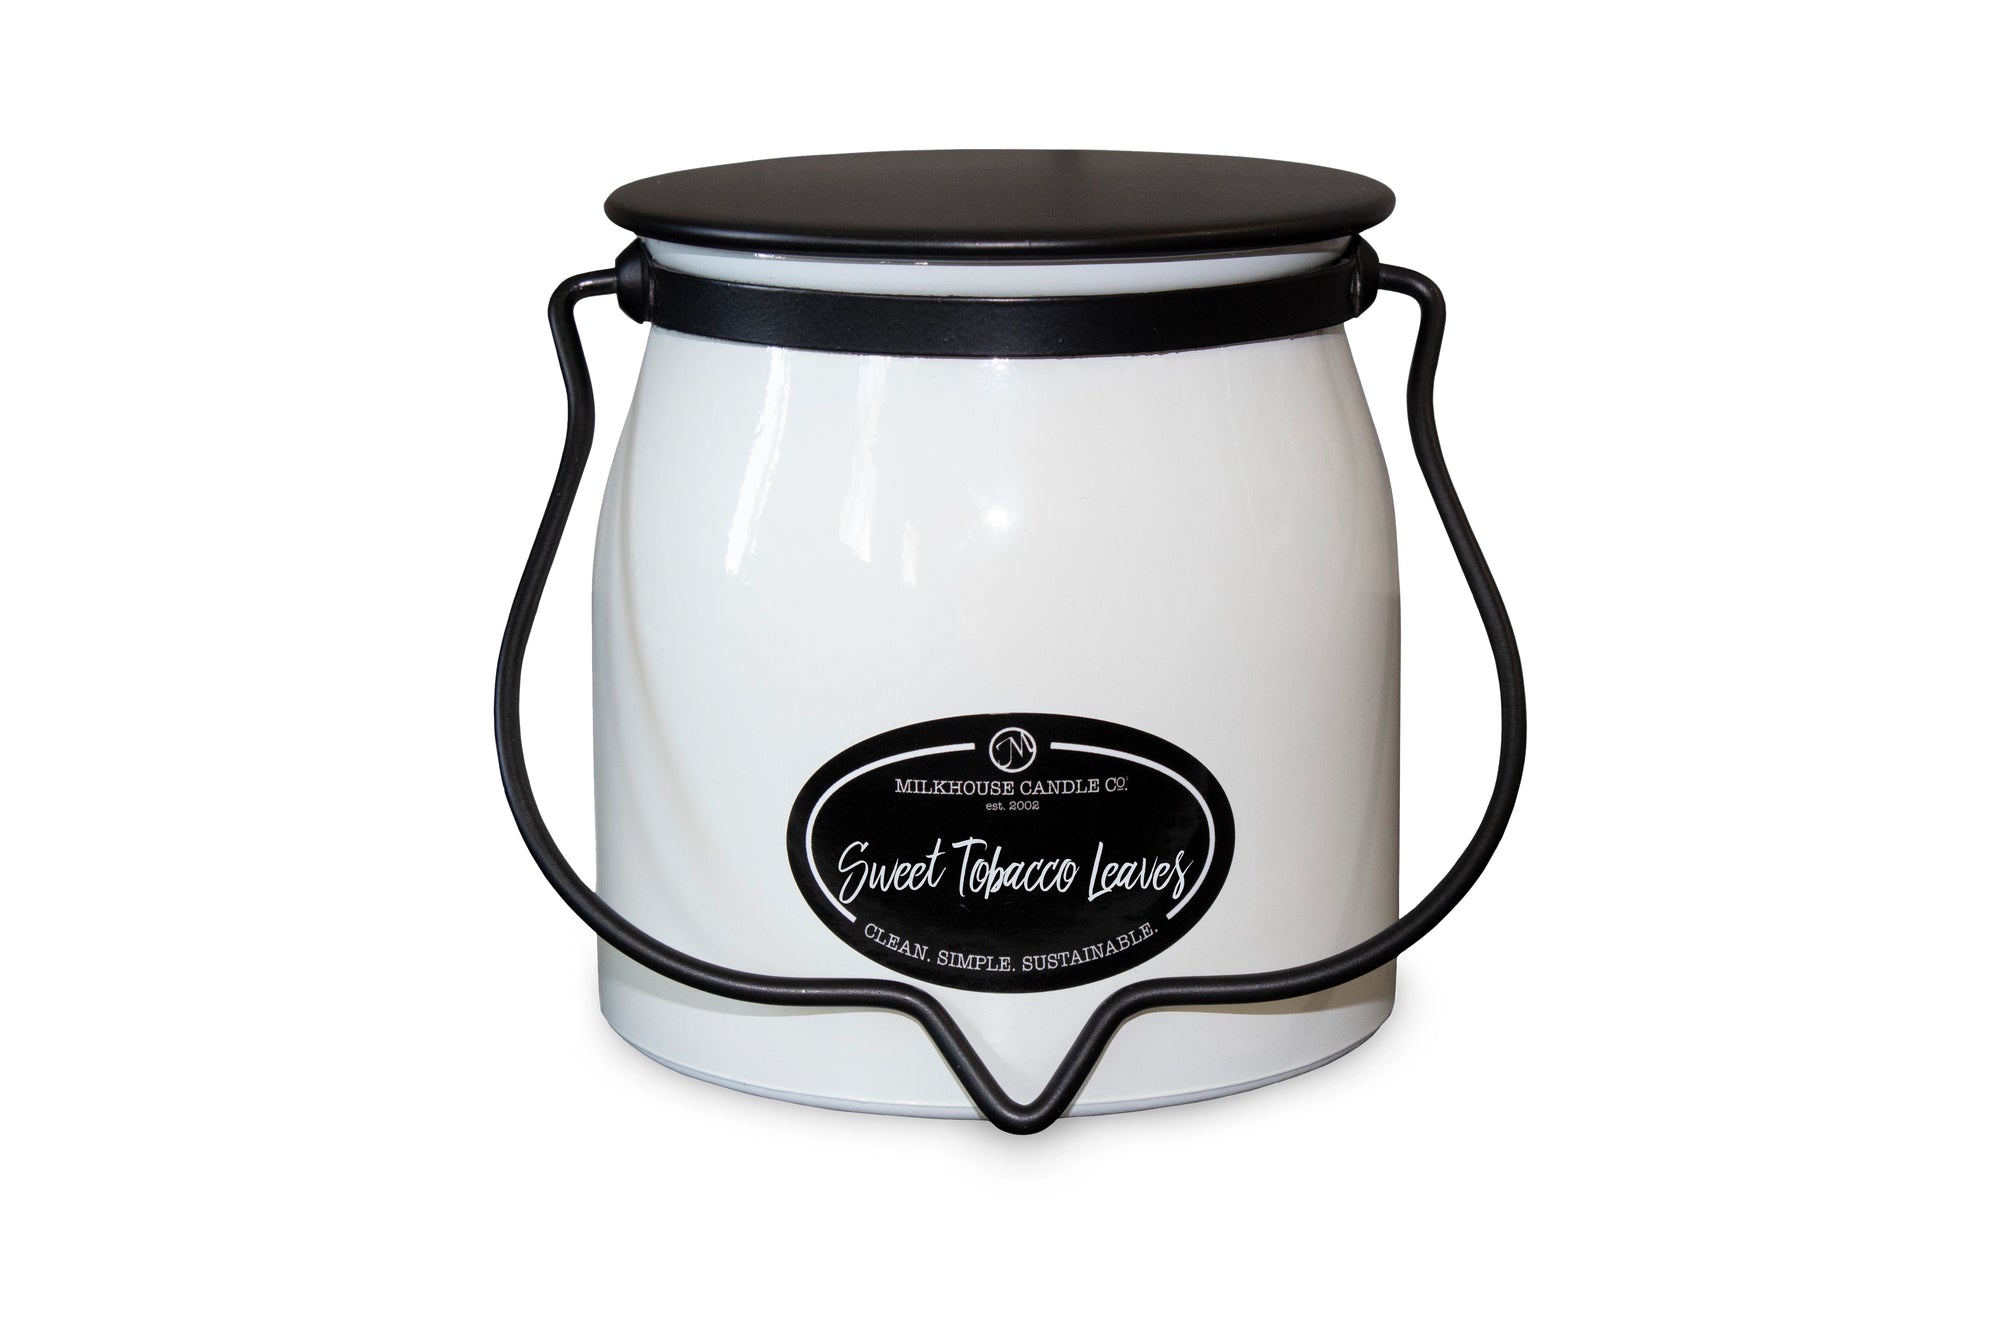 Sweet Tobacco Leaves Milkhouse Candle 16 oz.